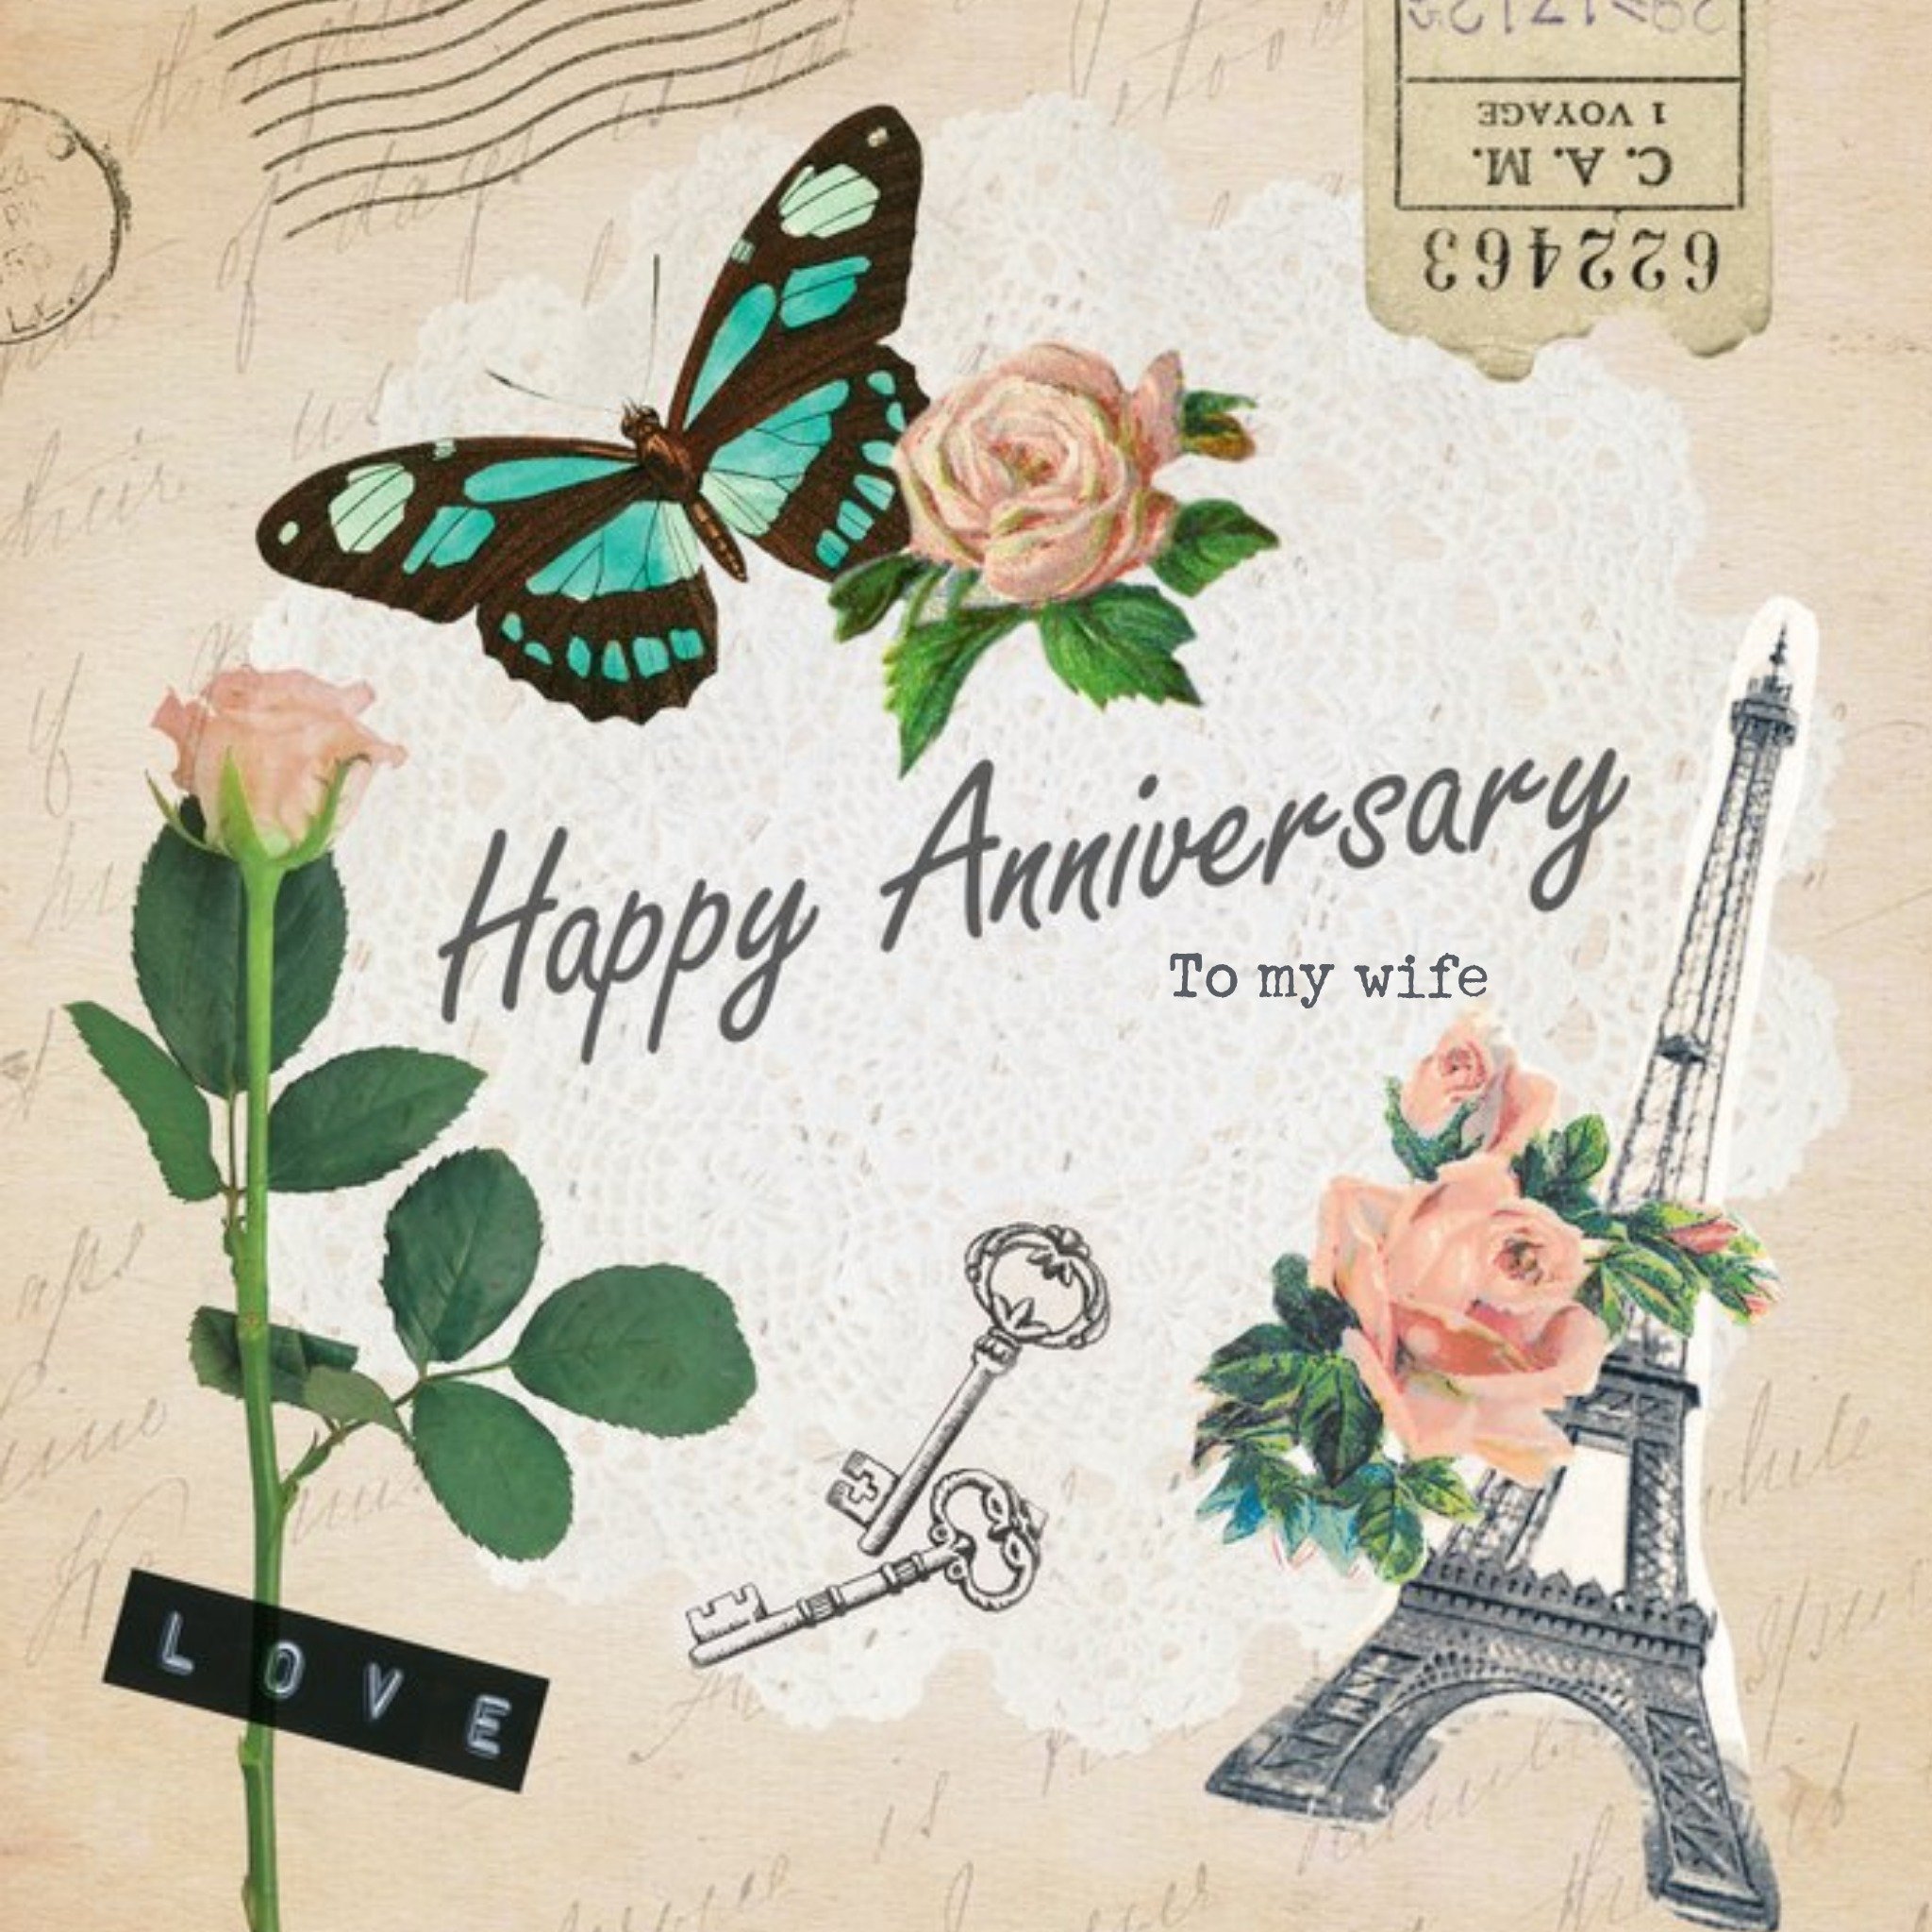 Moonpig Vintage Paris And Roses Anniversary Card For Wife, Large